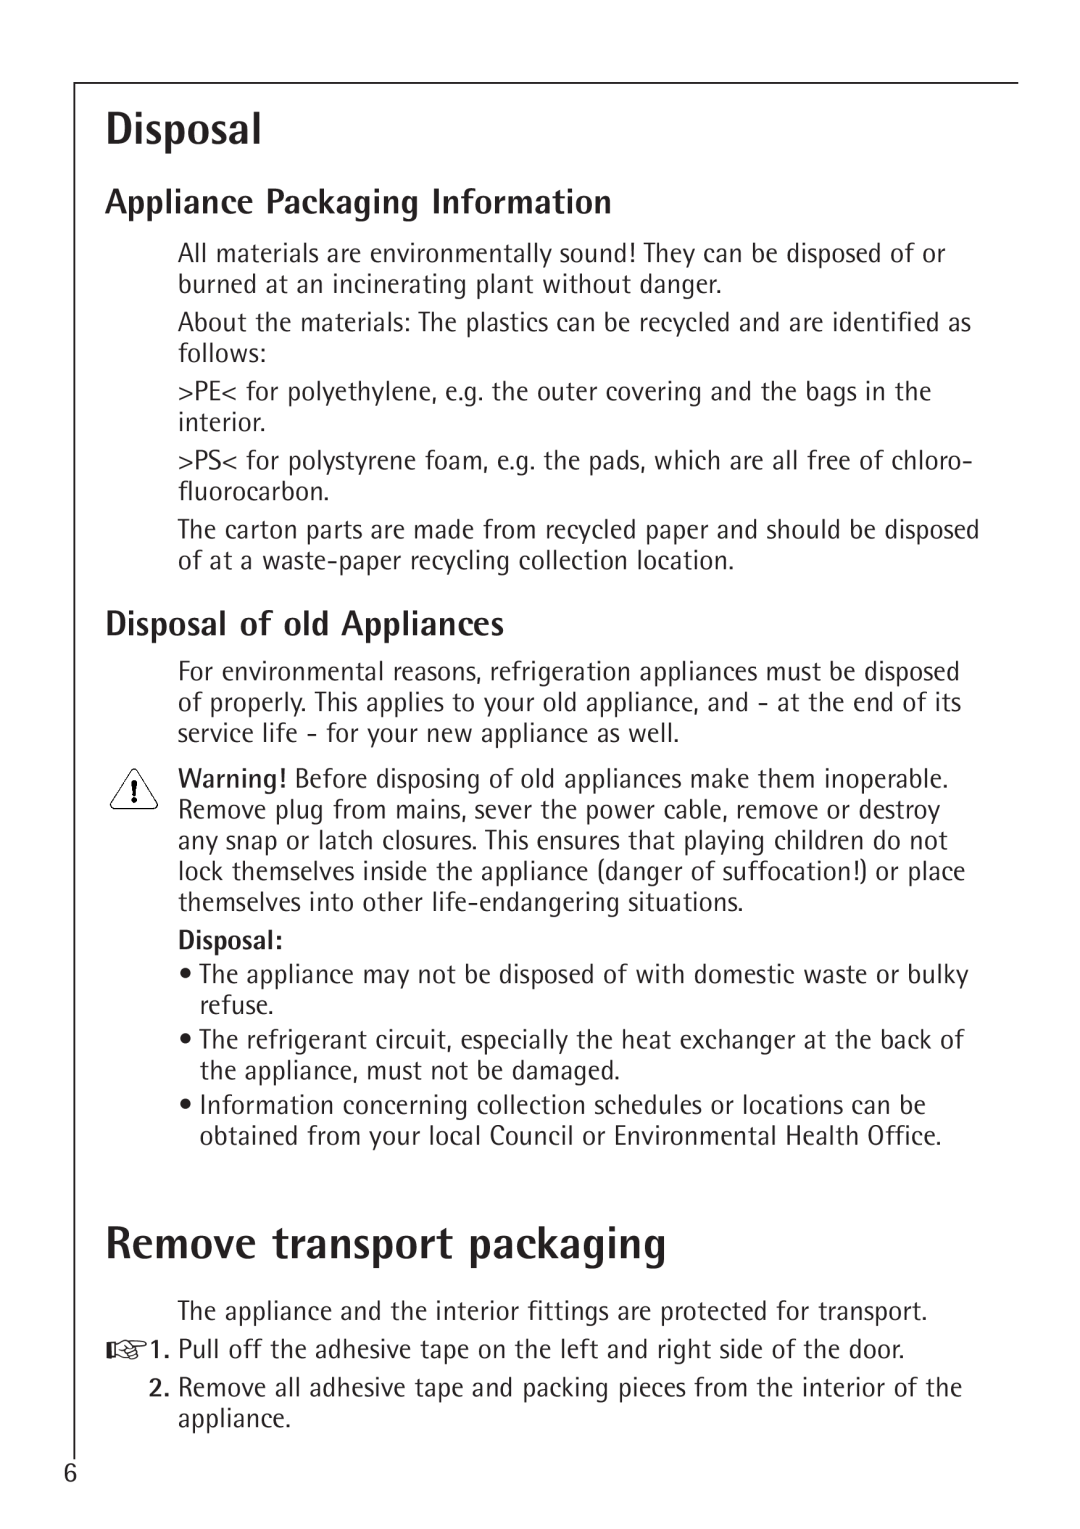 Electrolux 1583-8 TK Remove transport packaging, Appliance Packaging Information, Disposal of old Appliances 